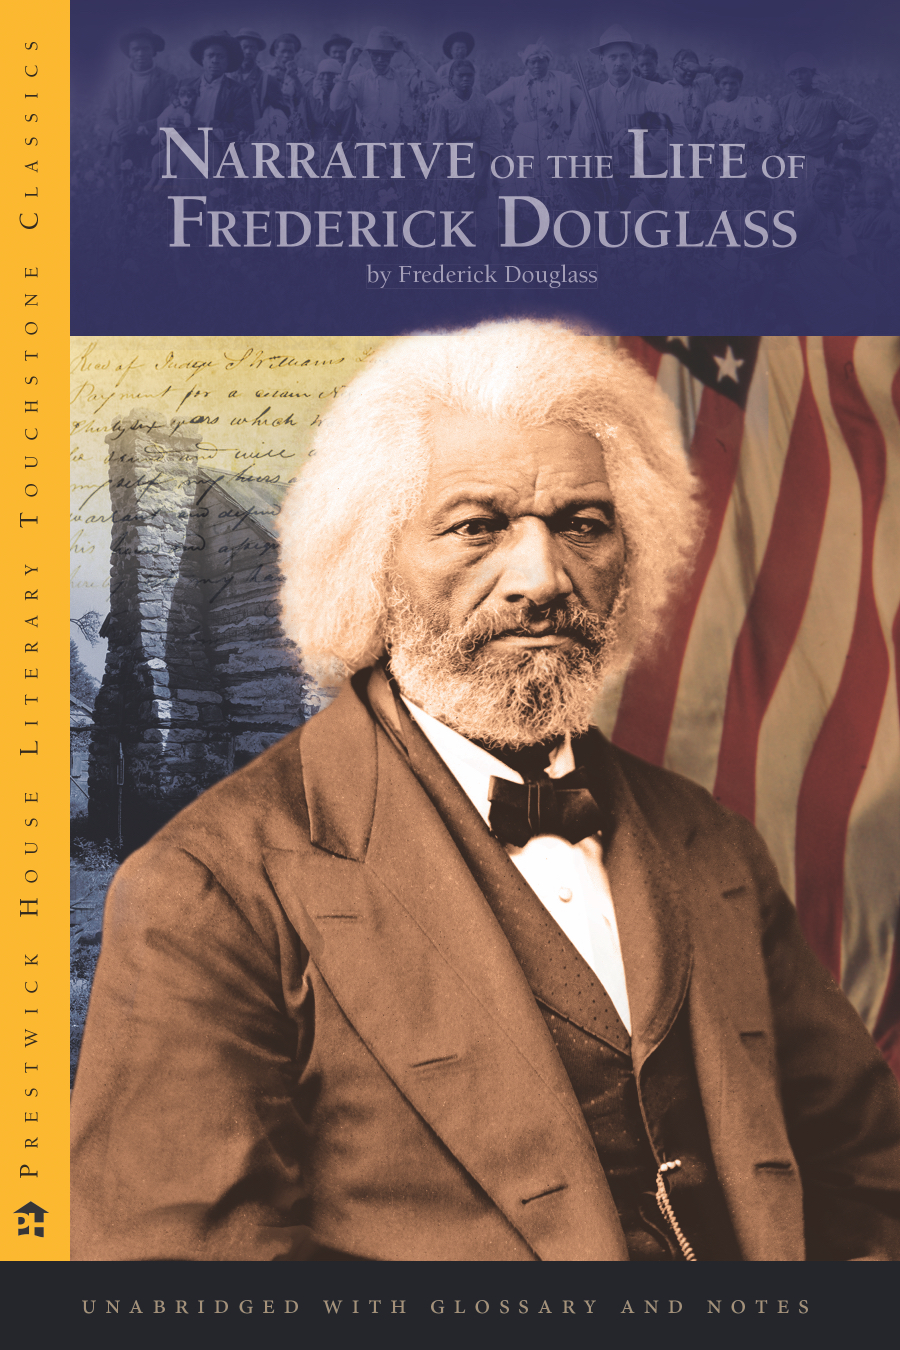 thesis of narrative of the life of frederick douglass